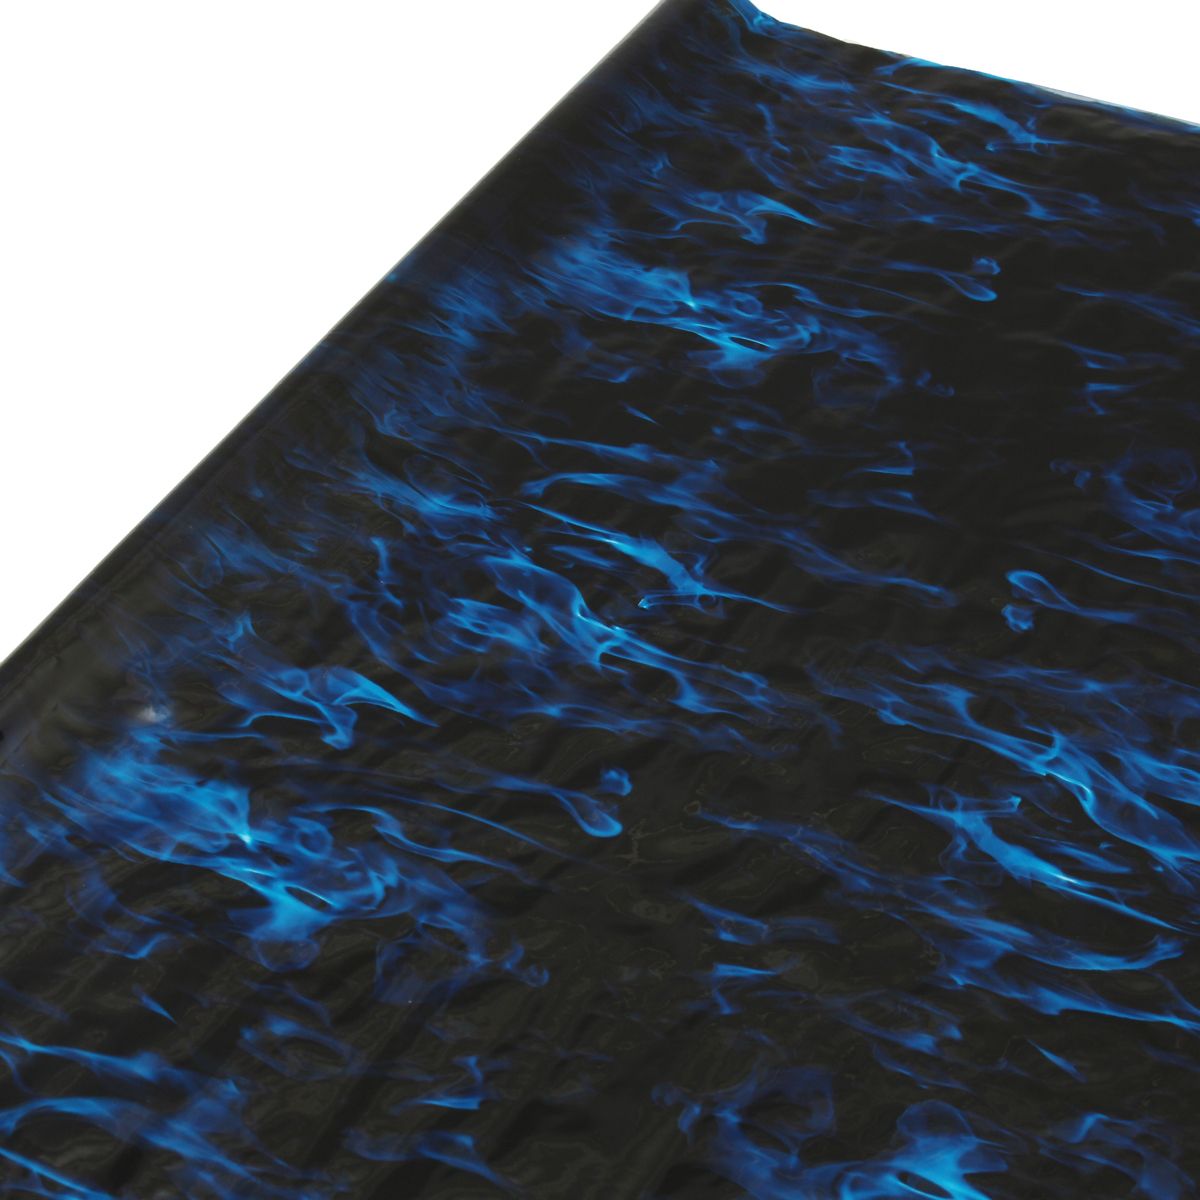 Cool-Blue-Fire-Hydrographic-Water-Transfer-Film-Hydro-Dipping-DIP-Print-All-Car-Decorations-1544886